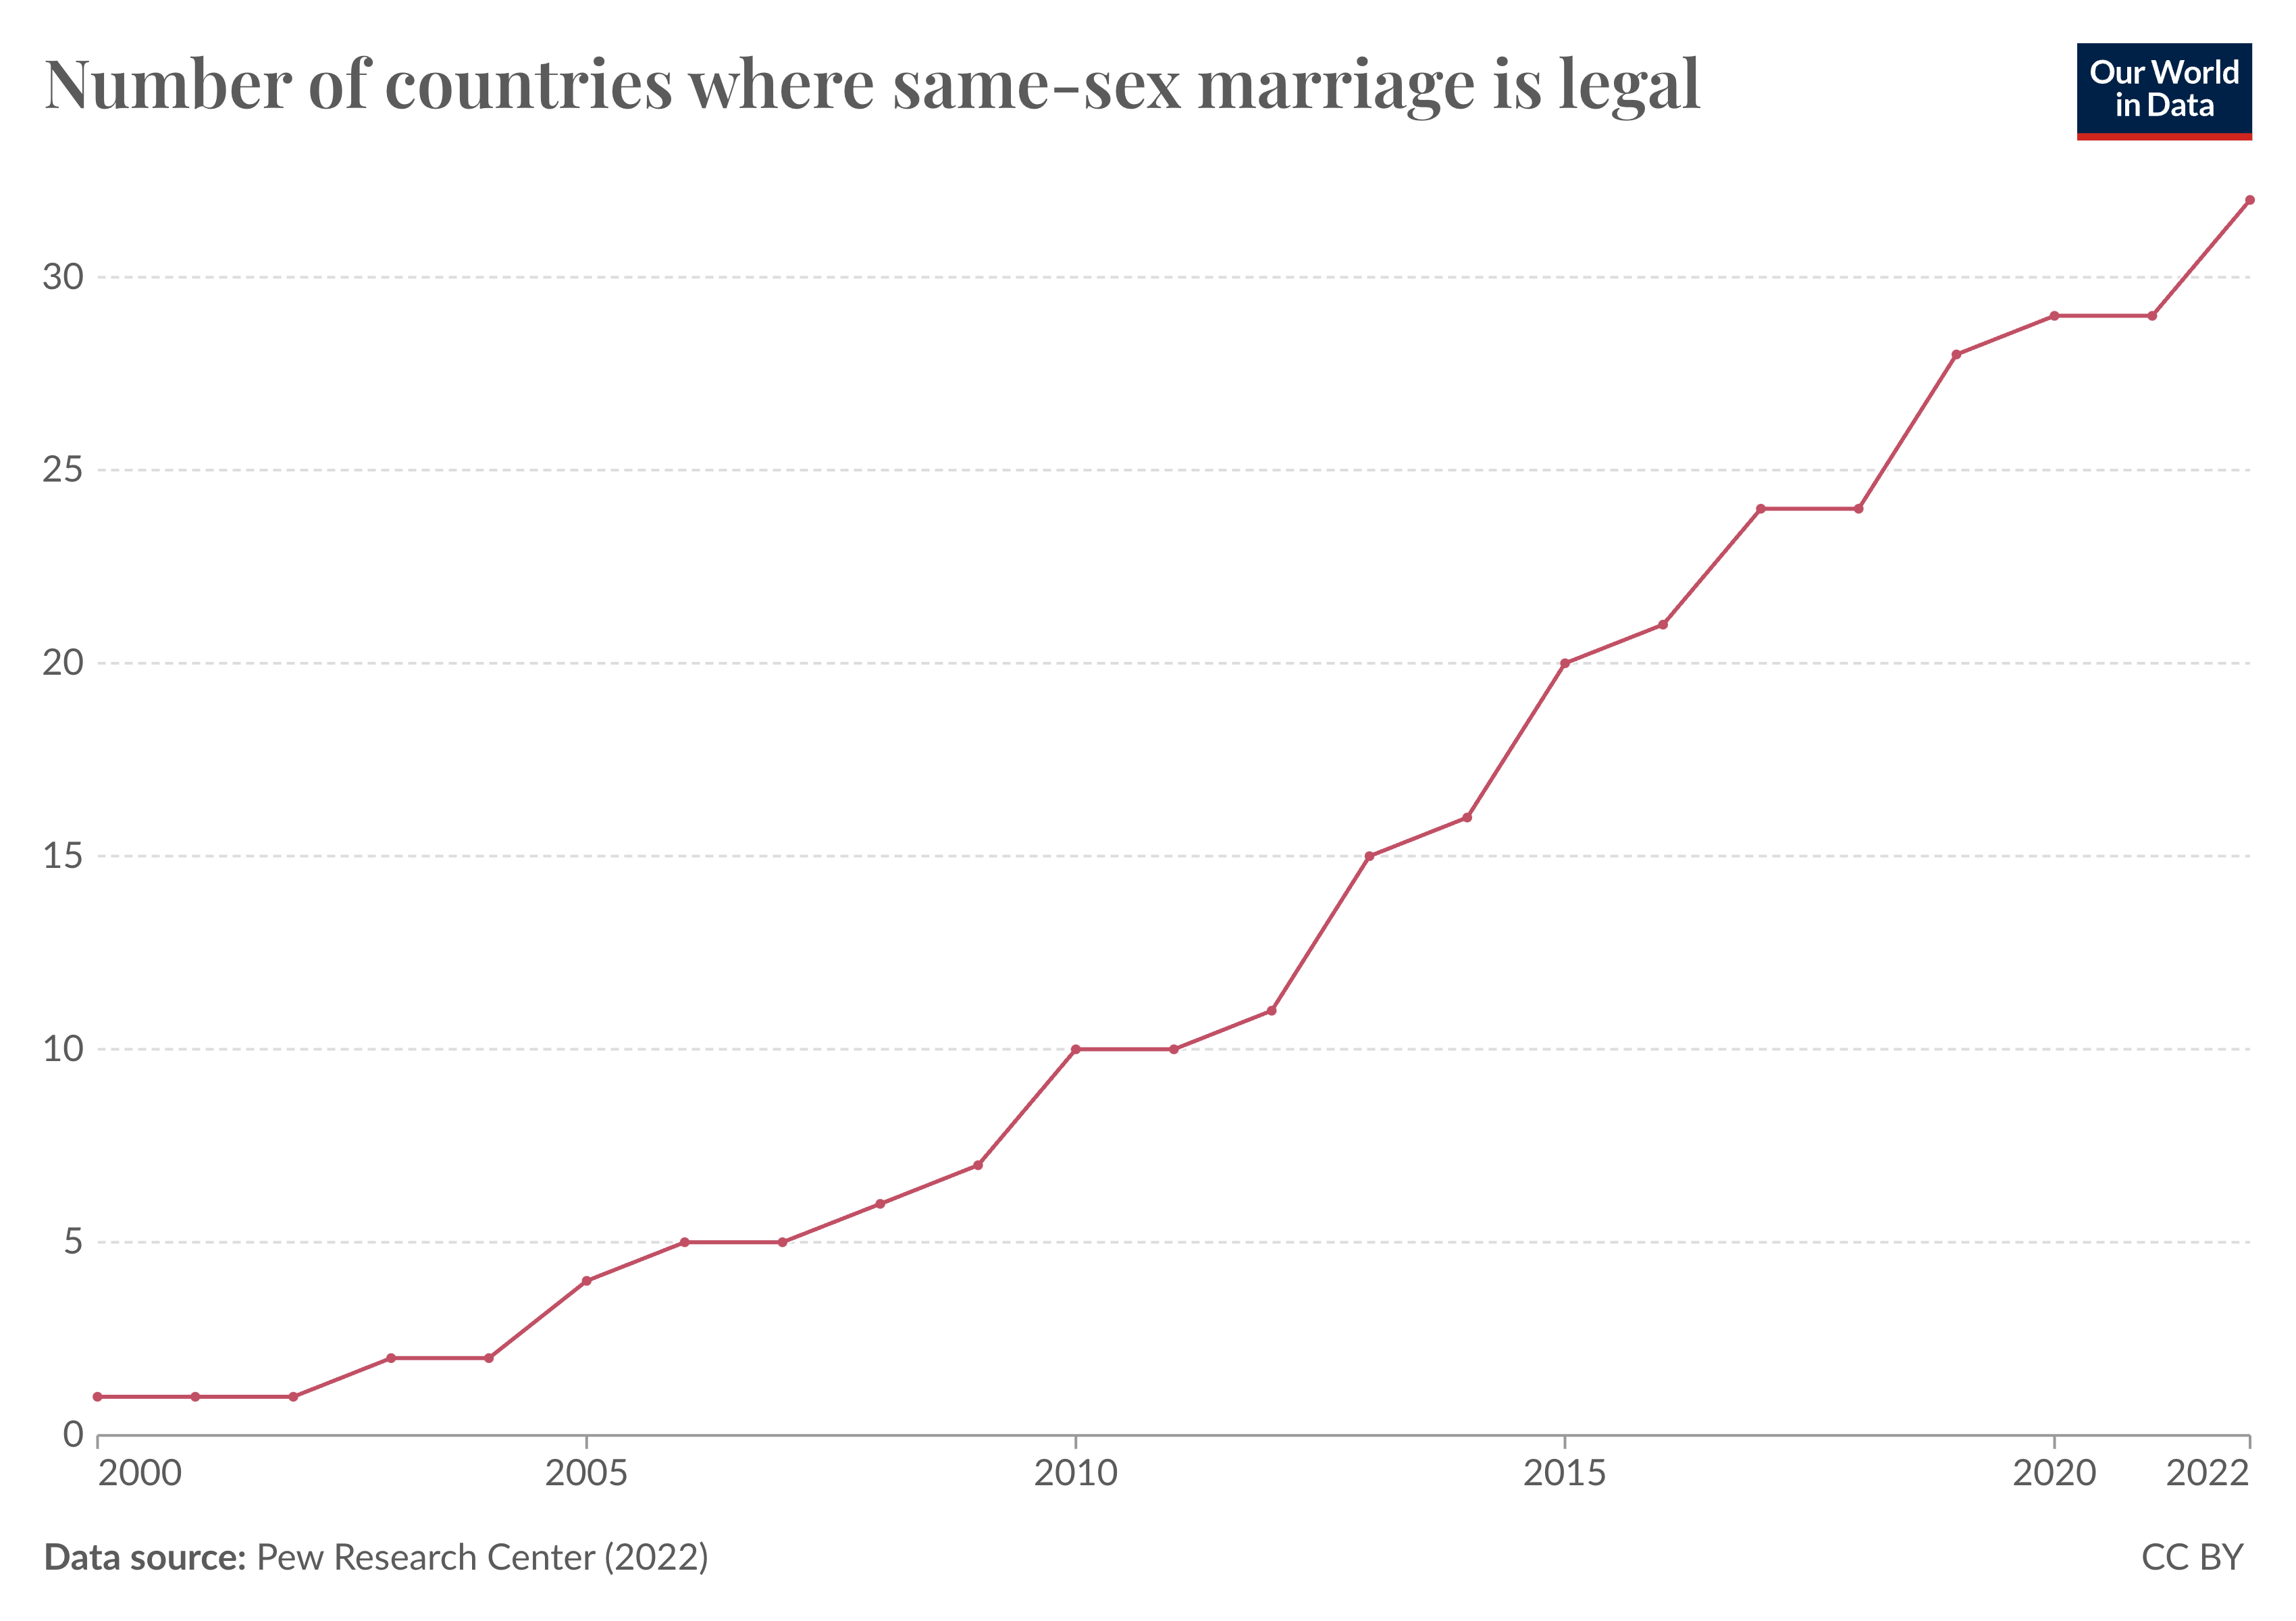 Line chart showing the number of countries where same-sex marriage is legal.